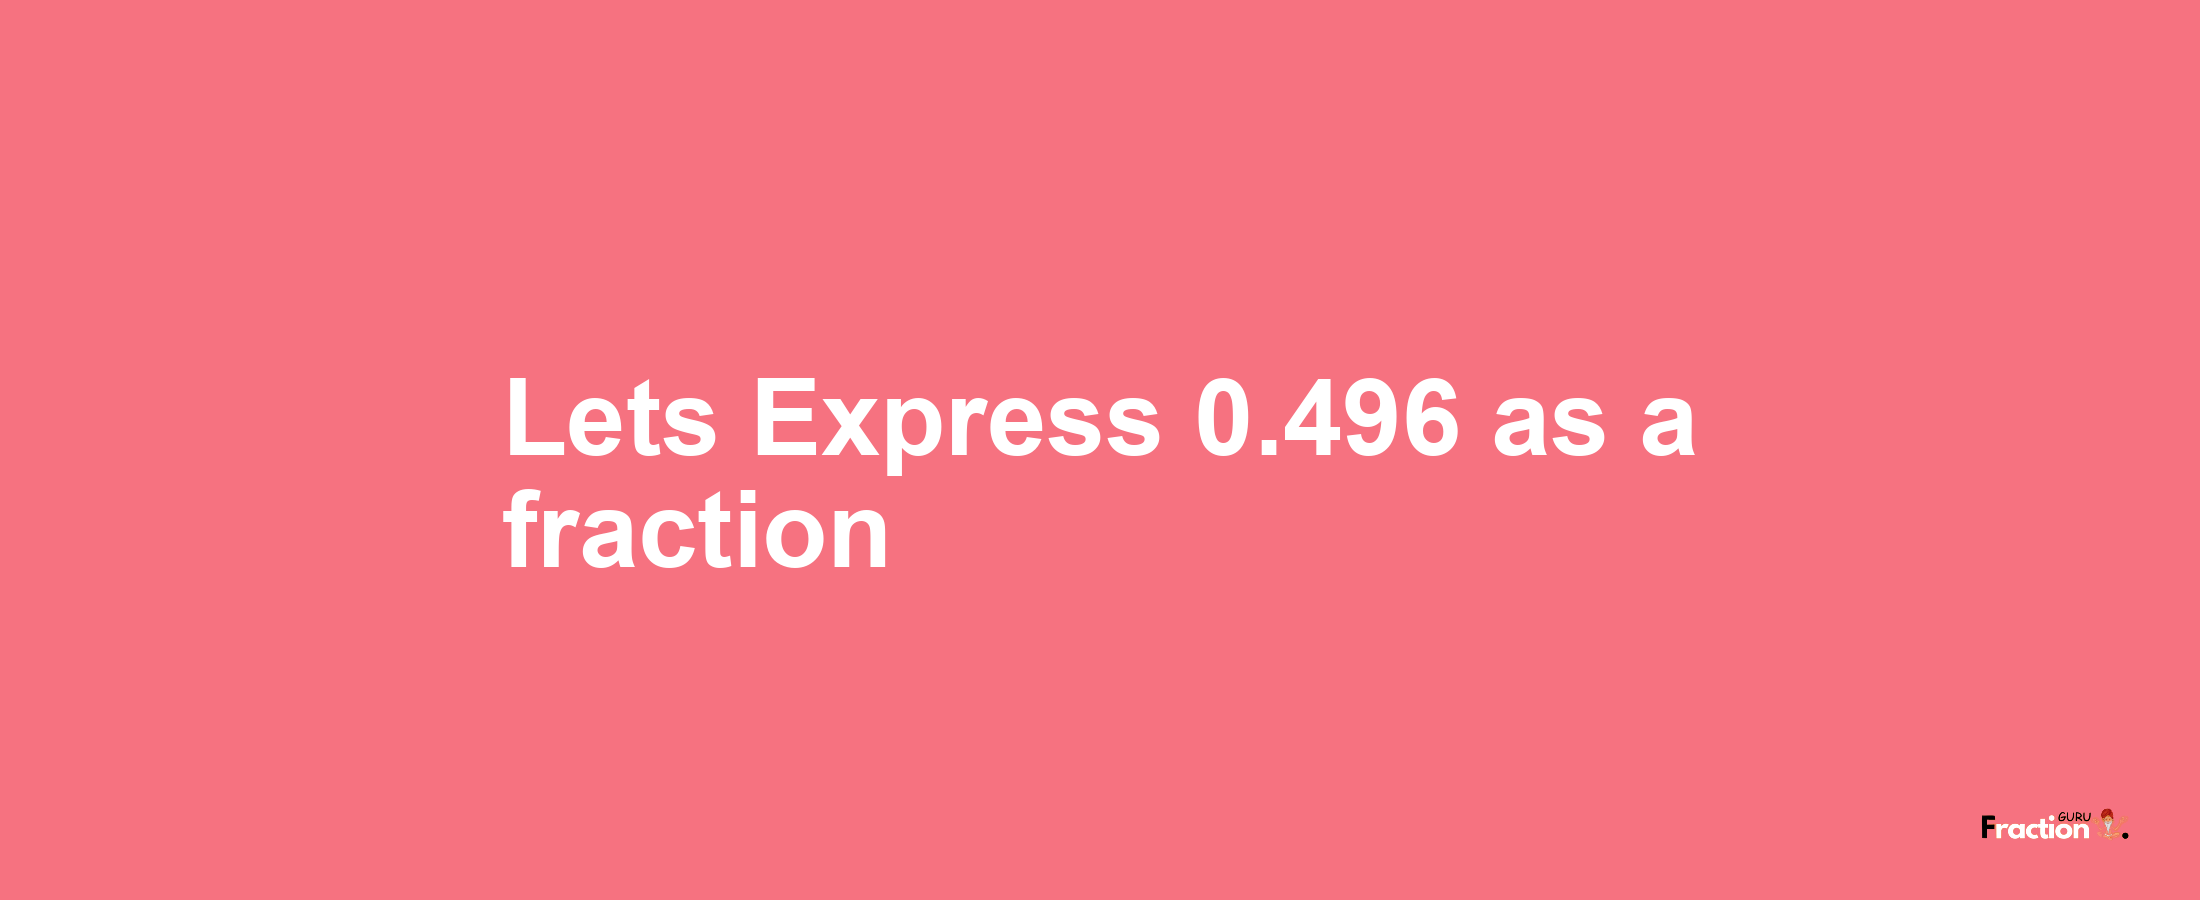 Lets Express 0.496 as afraction